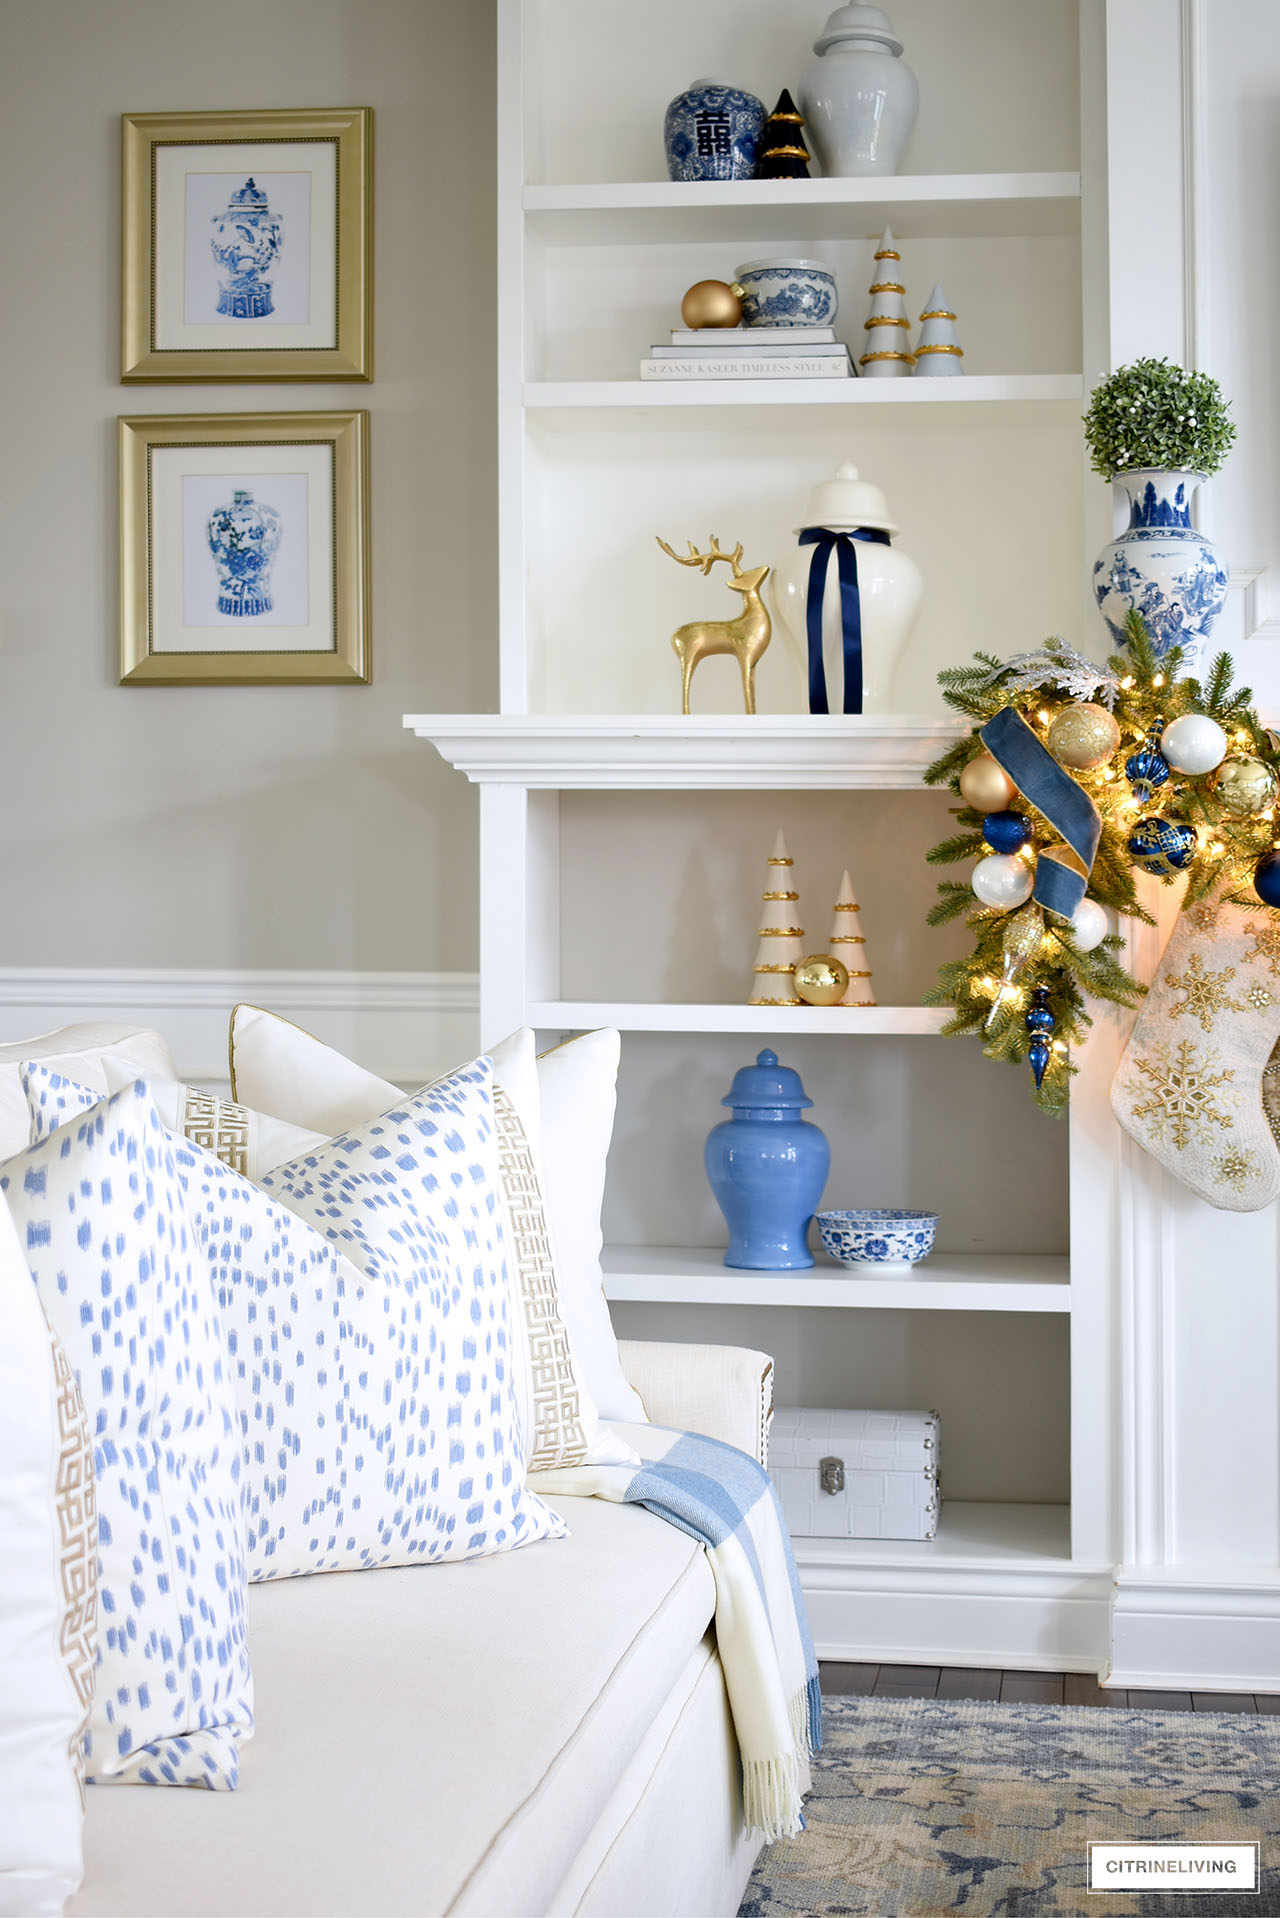 Living room shelves styled for christmas with blue, white and gold decor - ginger jars, chinoiserie accents, reindeer and decorative ceramic christmas trees.